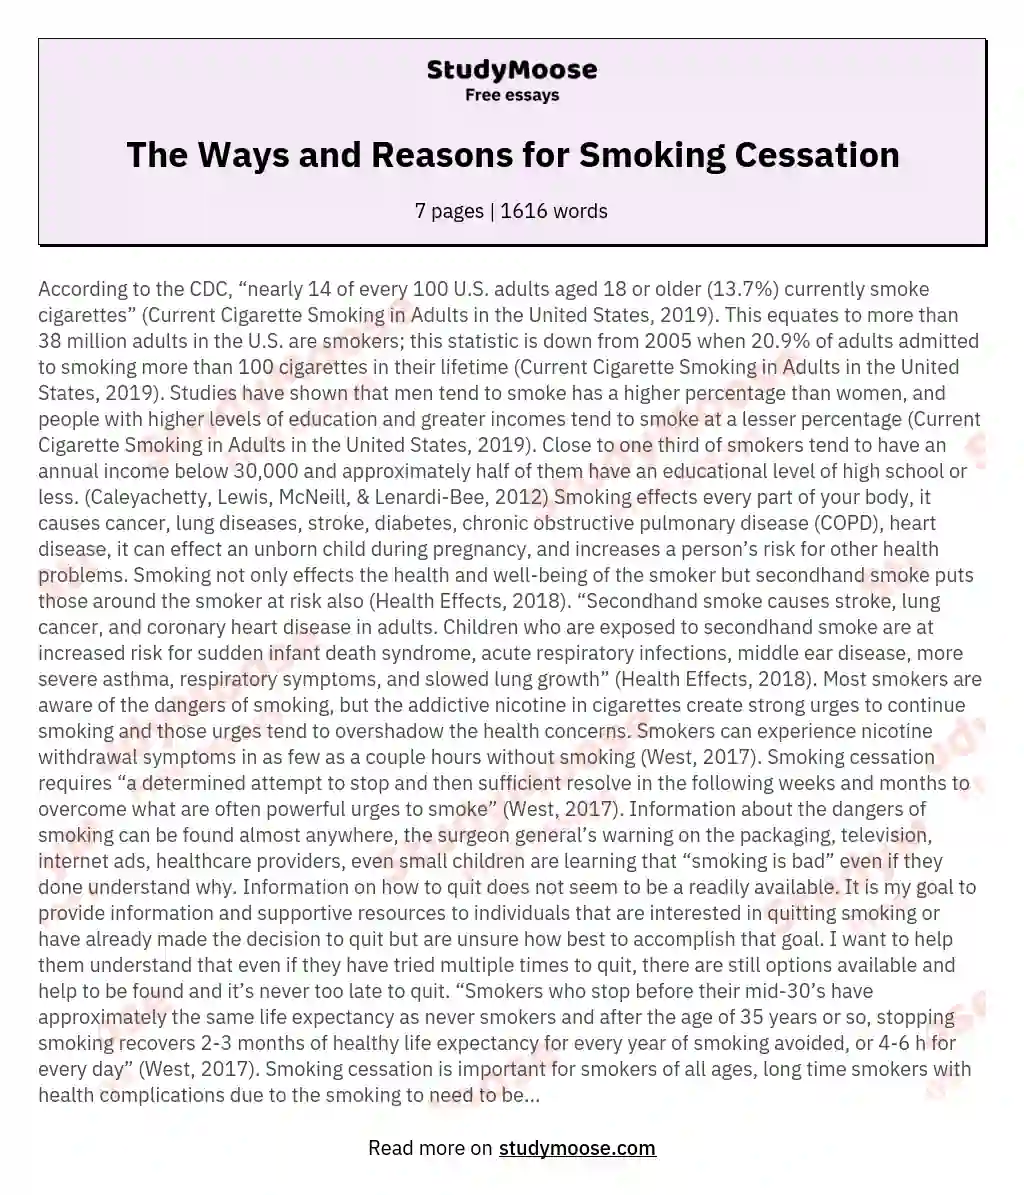 The Ways and Reasons for Smoking Cessation essay